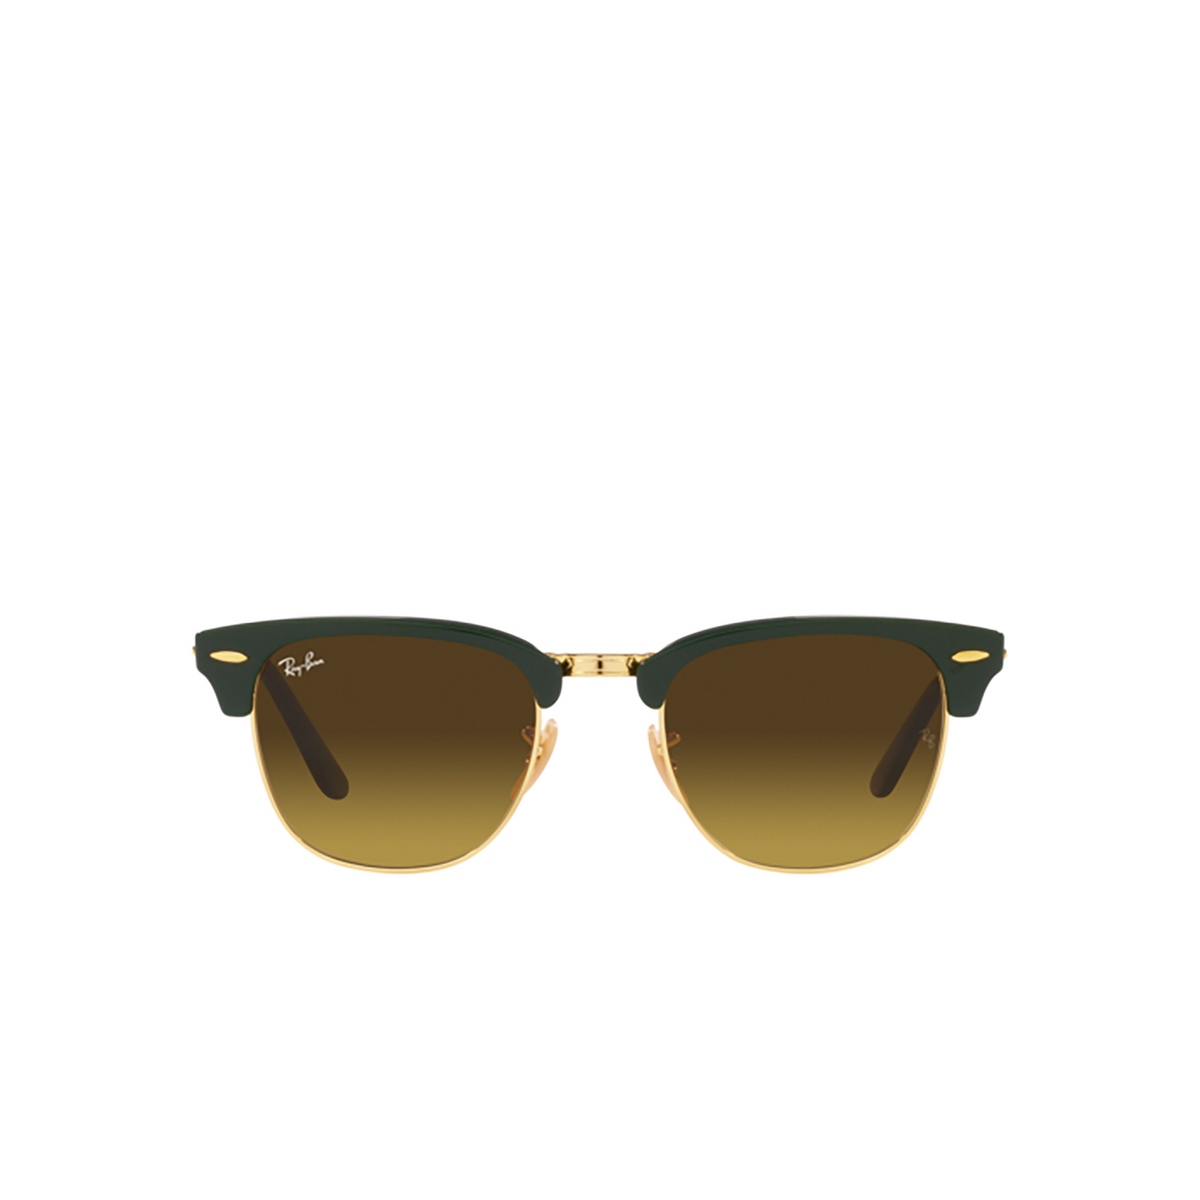 Ray-Ban CLUBMASTER FOLDING Sunglasses 136885 Green - front view